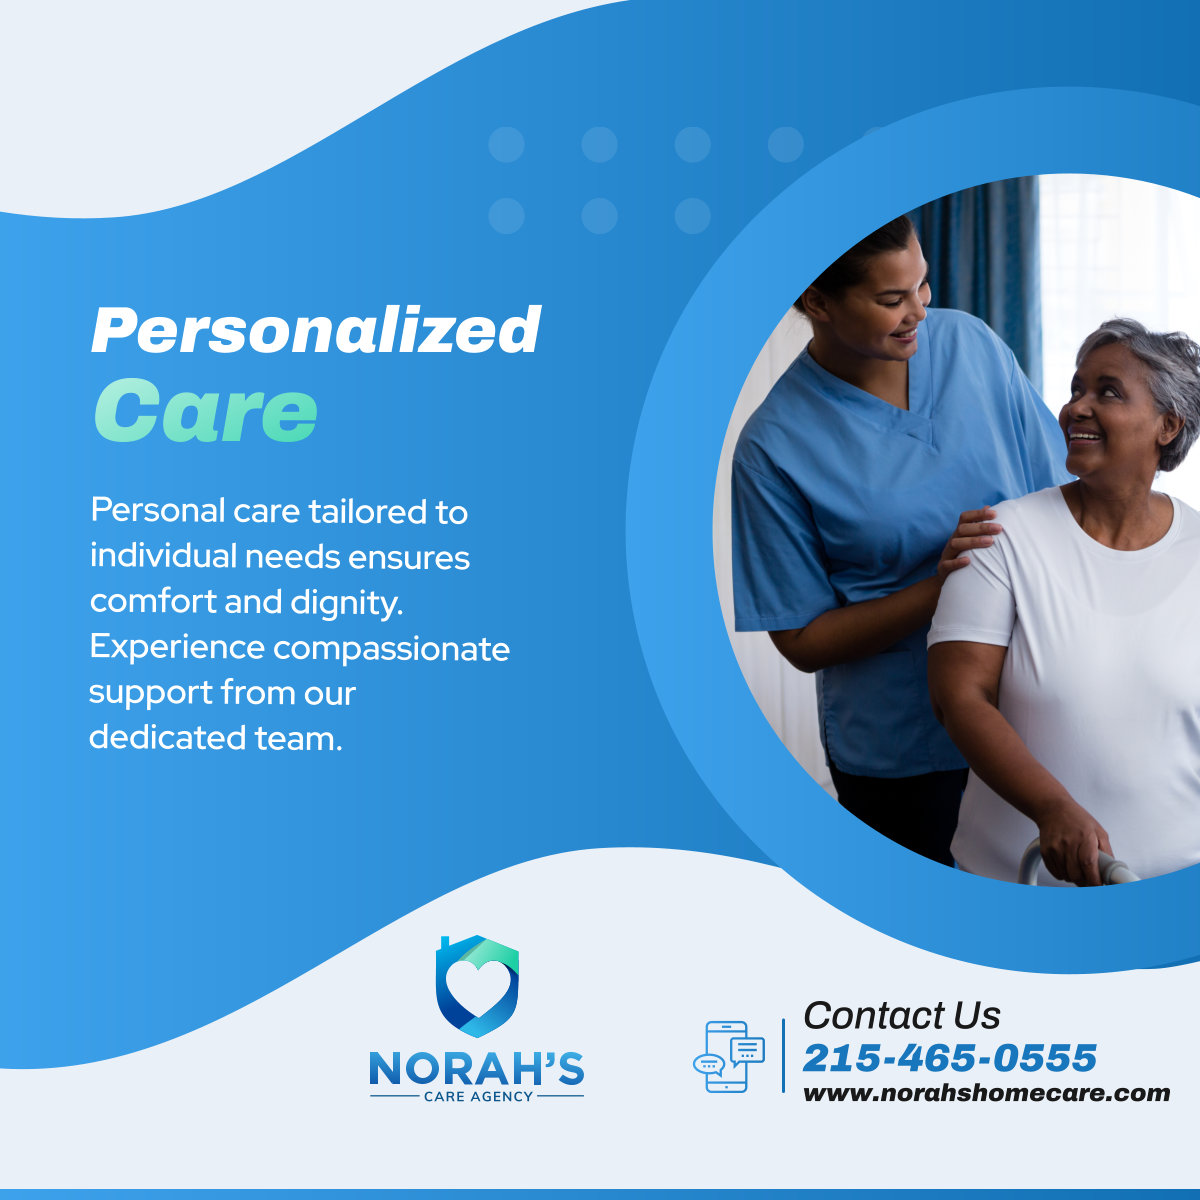 Experience compassionate support with personalized care tailored to individual needs. Comfort and dignity are our top priorities. Reach out to us now! 

#PersonalCare #PhiladelphiaPA #HomeCare